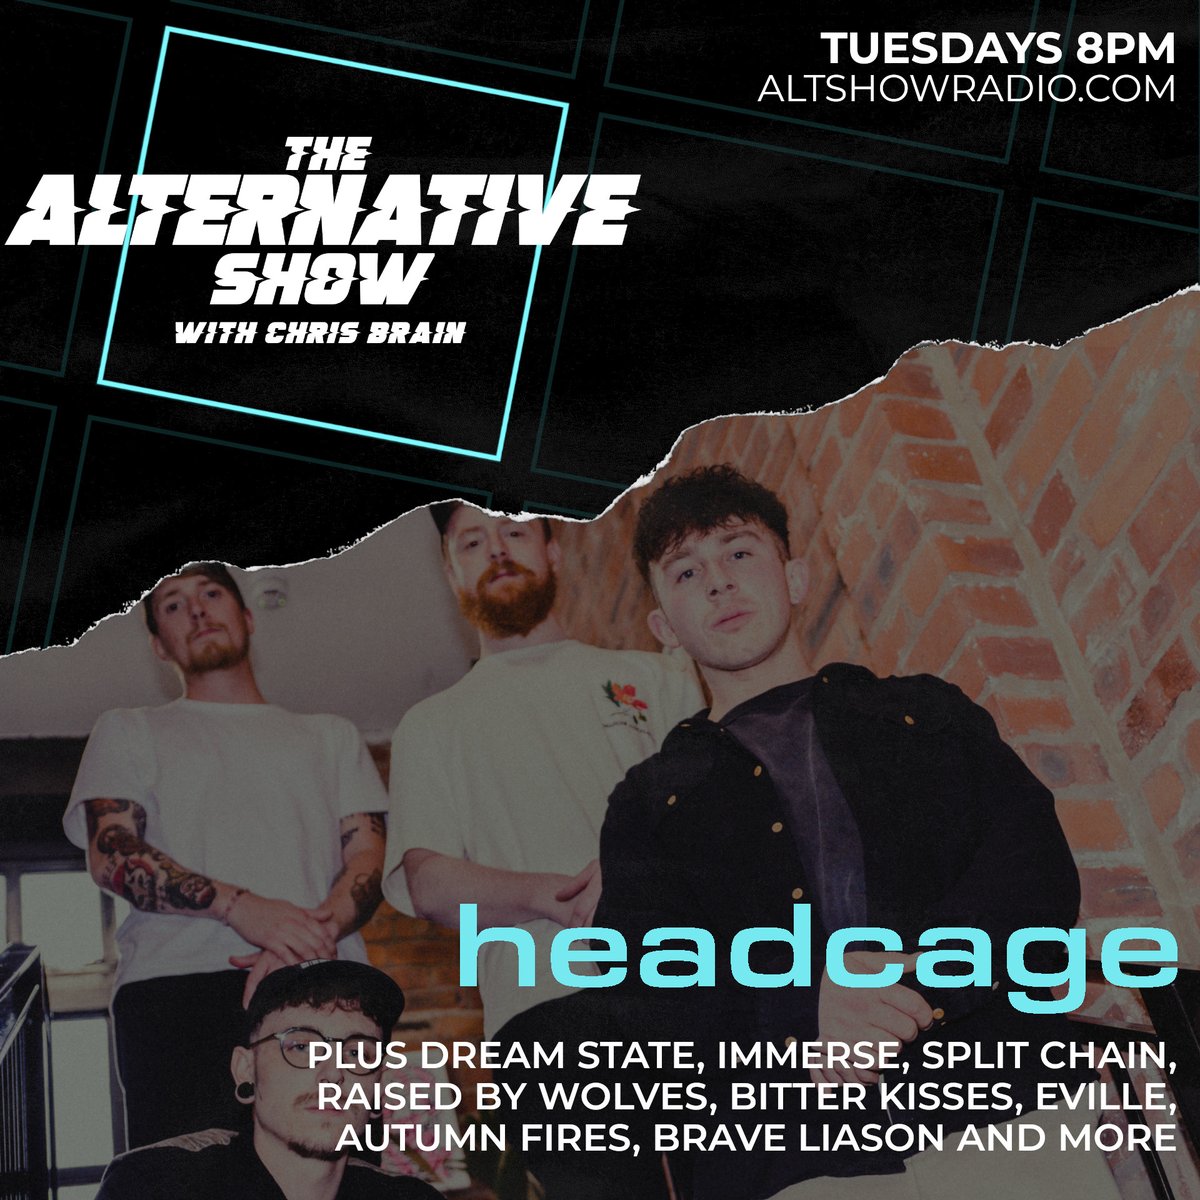 💥TUESDAY 8PM ALTSHOWRADIO.COM💥 On this weeks show I am joined by @headcageuk to chat about their debut EP, this weeks 🔥 HOTTEST TRACK 🔥 from @DreamStateUK music from from @splitchainband @RbwUK @bitterkissesuk @EvilleBand @AutumnFiresUK @BRAVELIAISON and LOADS more!